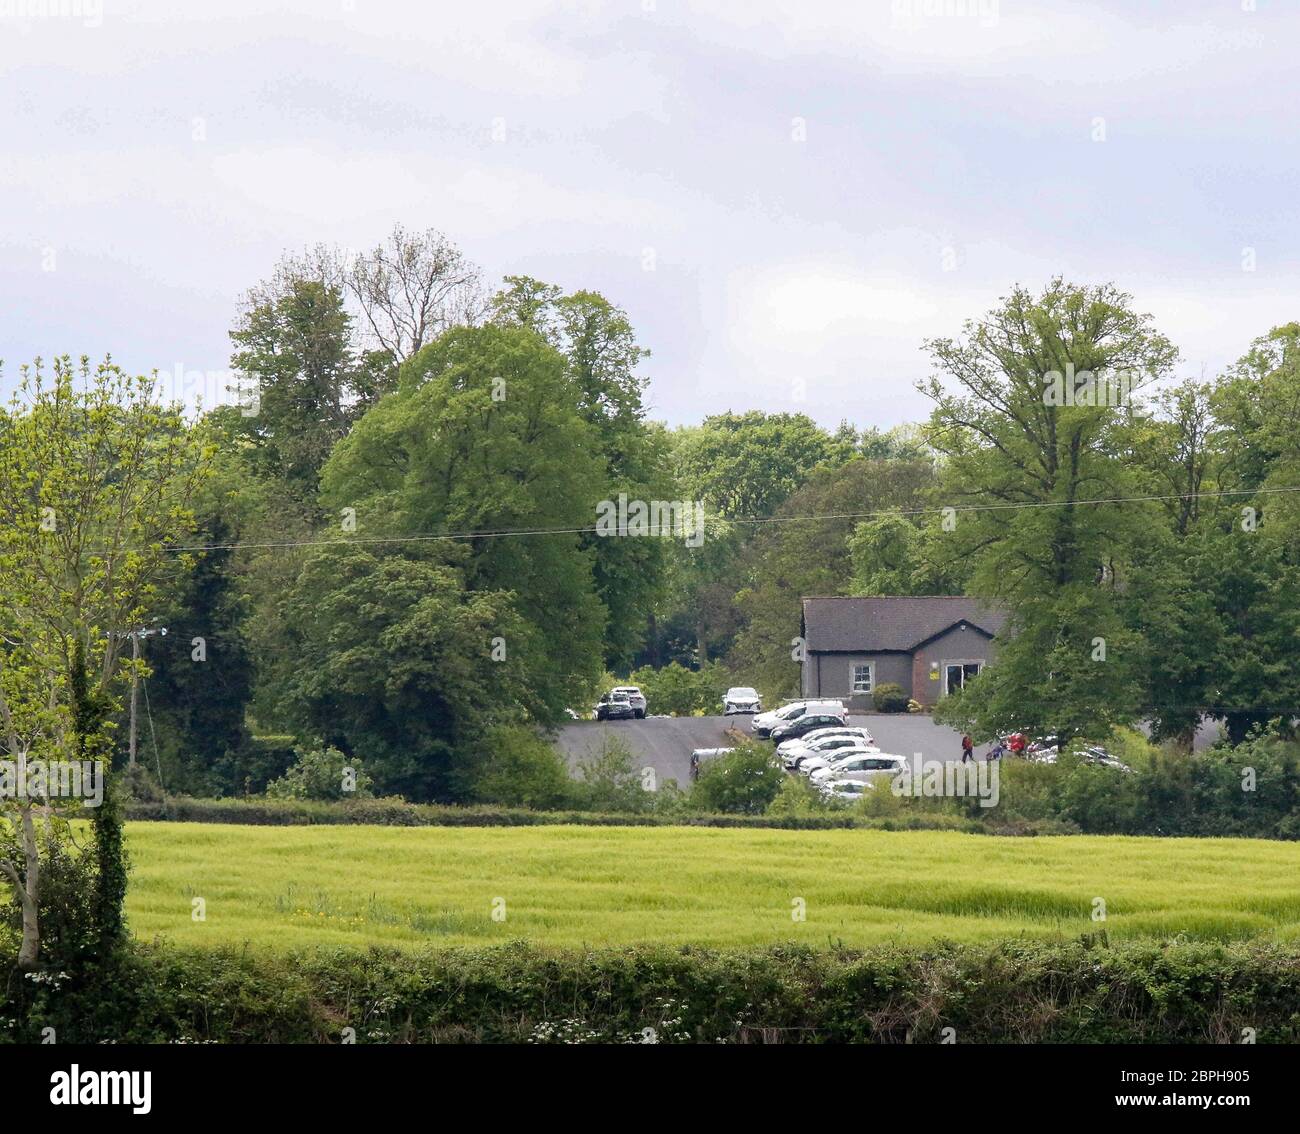 Edenmore Golf Club, Magheralin, Co Down, Northern Ireland. 19 May 2020. Golf  has resumed again in Northern Ireland after the Northern Ireland Executive  eased lockdown restrictions yesterday (Monday 18 May). Golf is